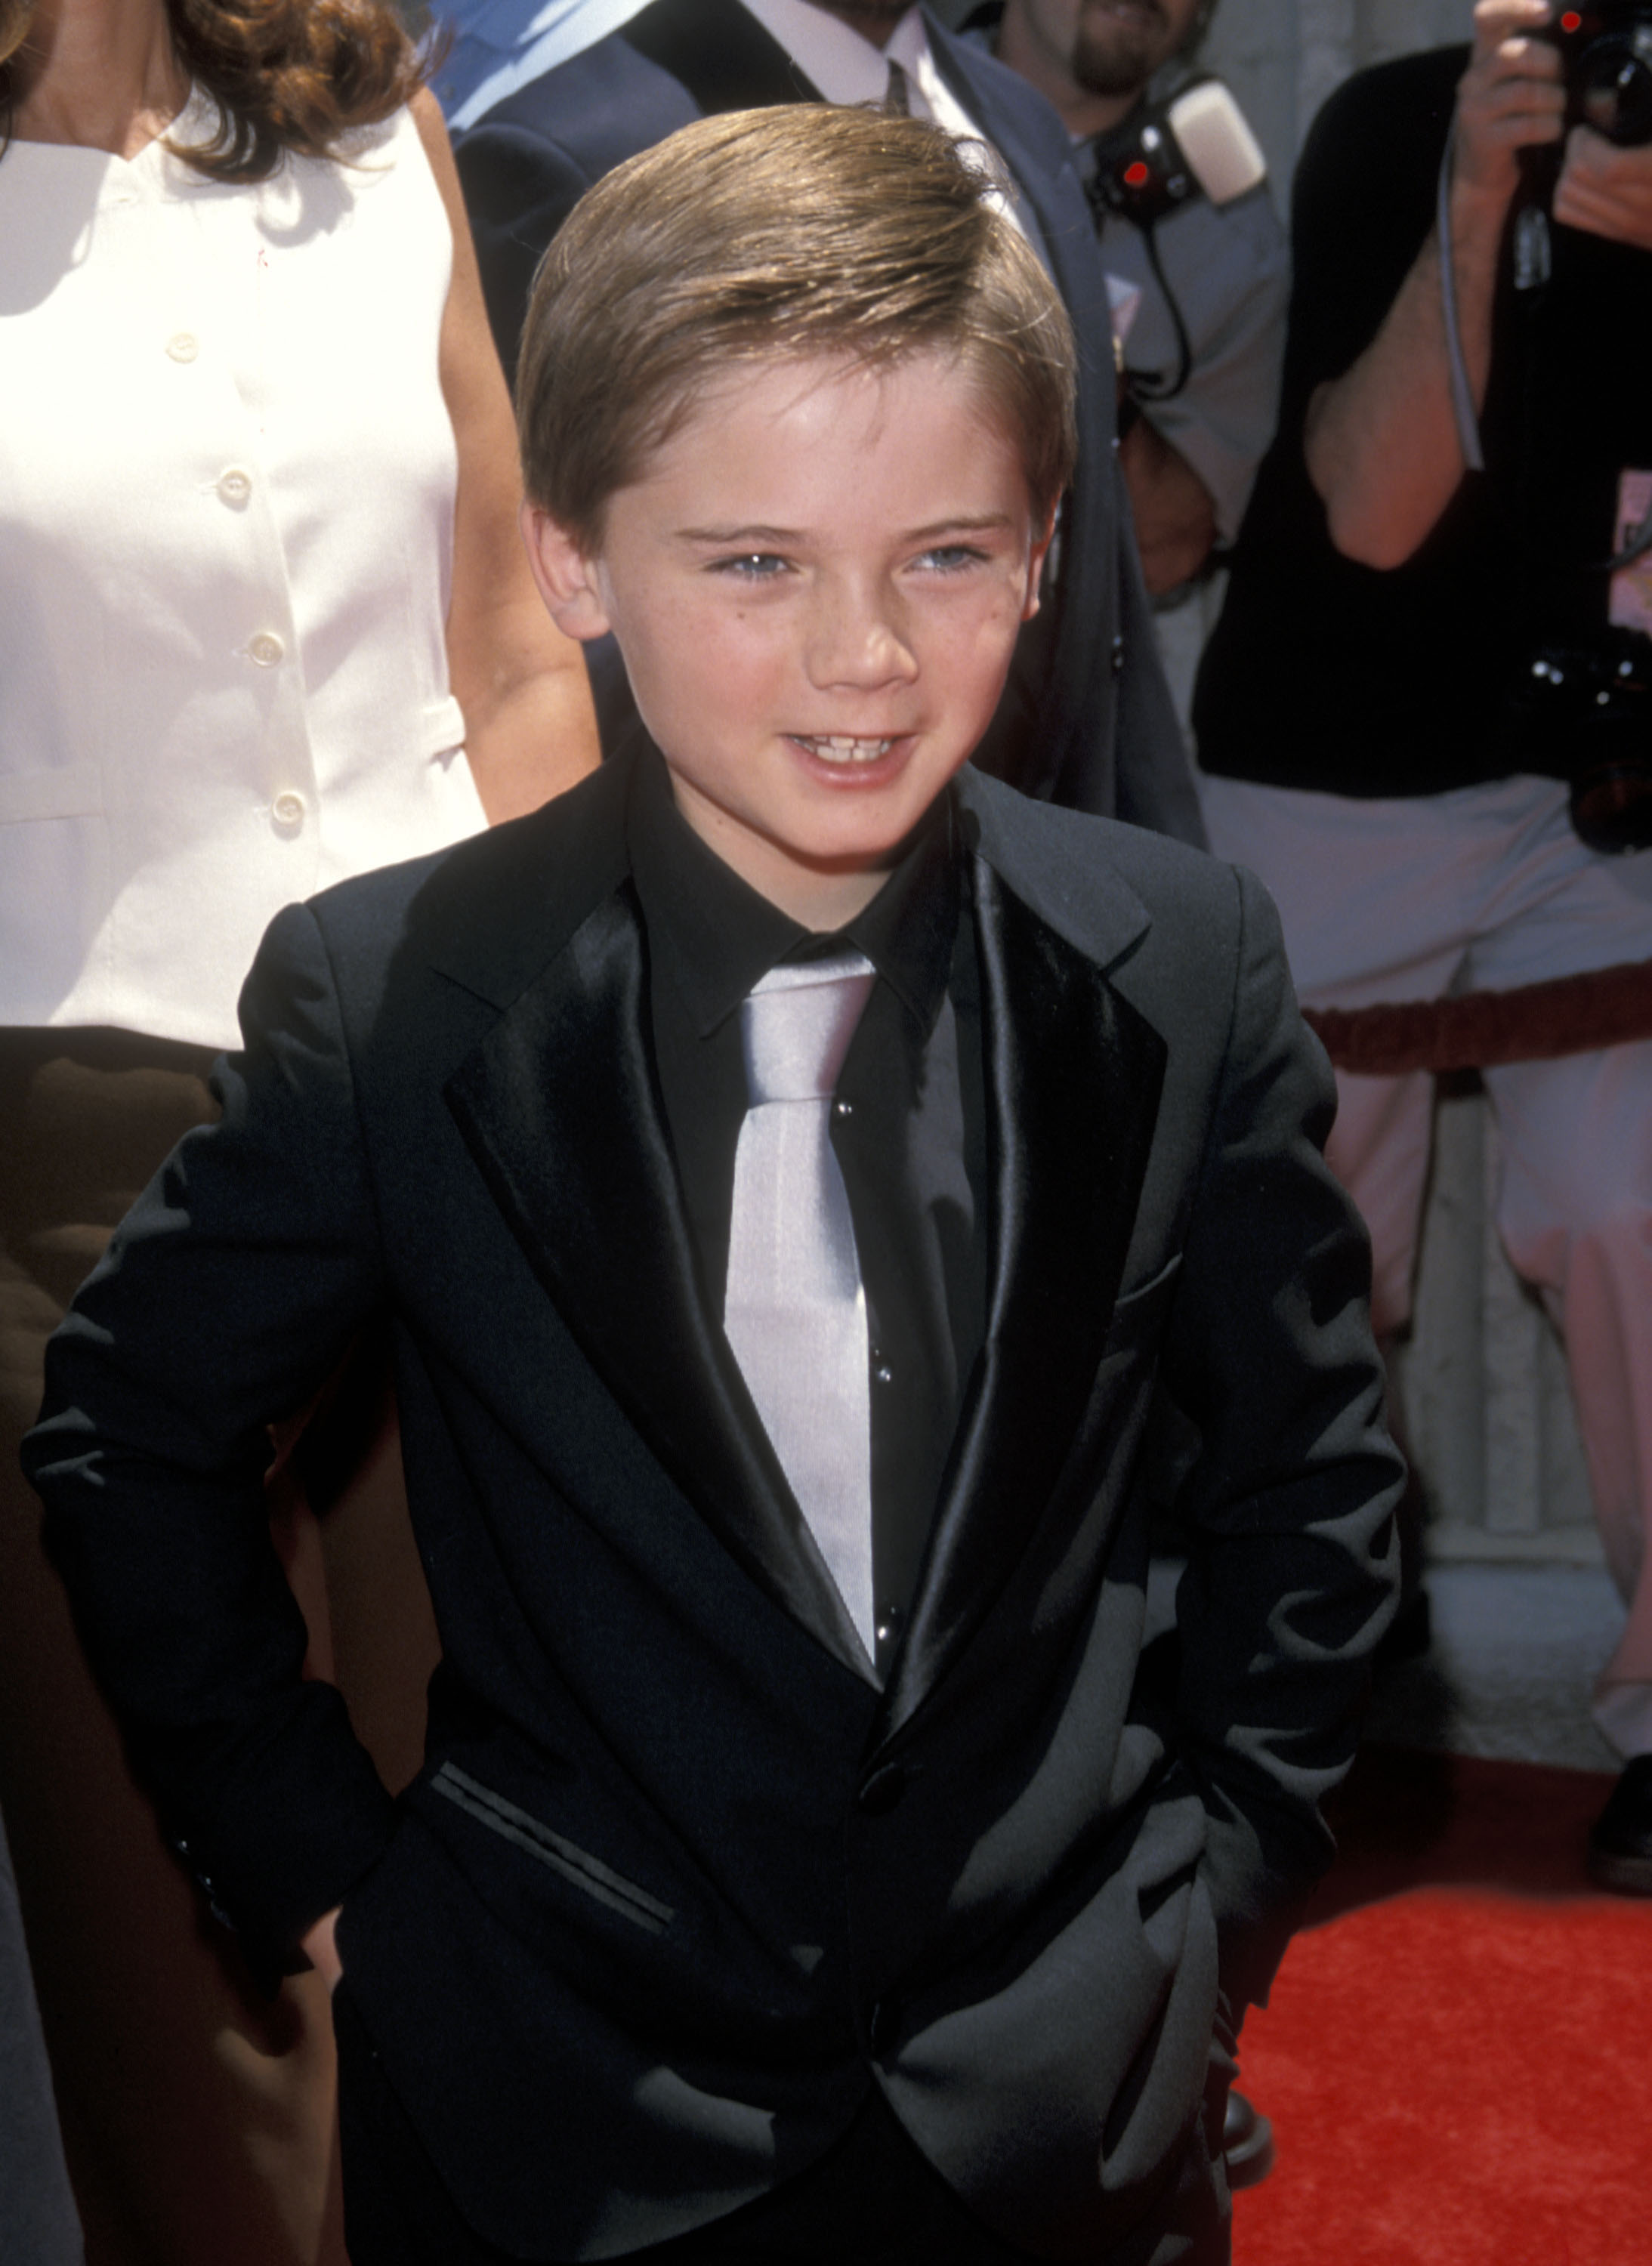 Jake Lloyd on May 16, 1999, in Westwood, California. | Source: Getty Images